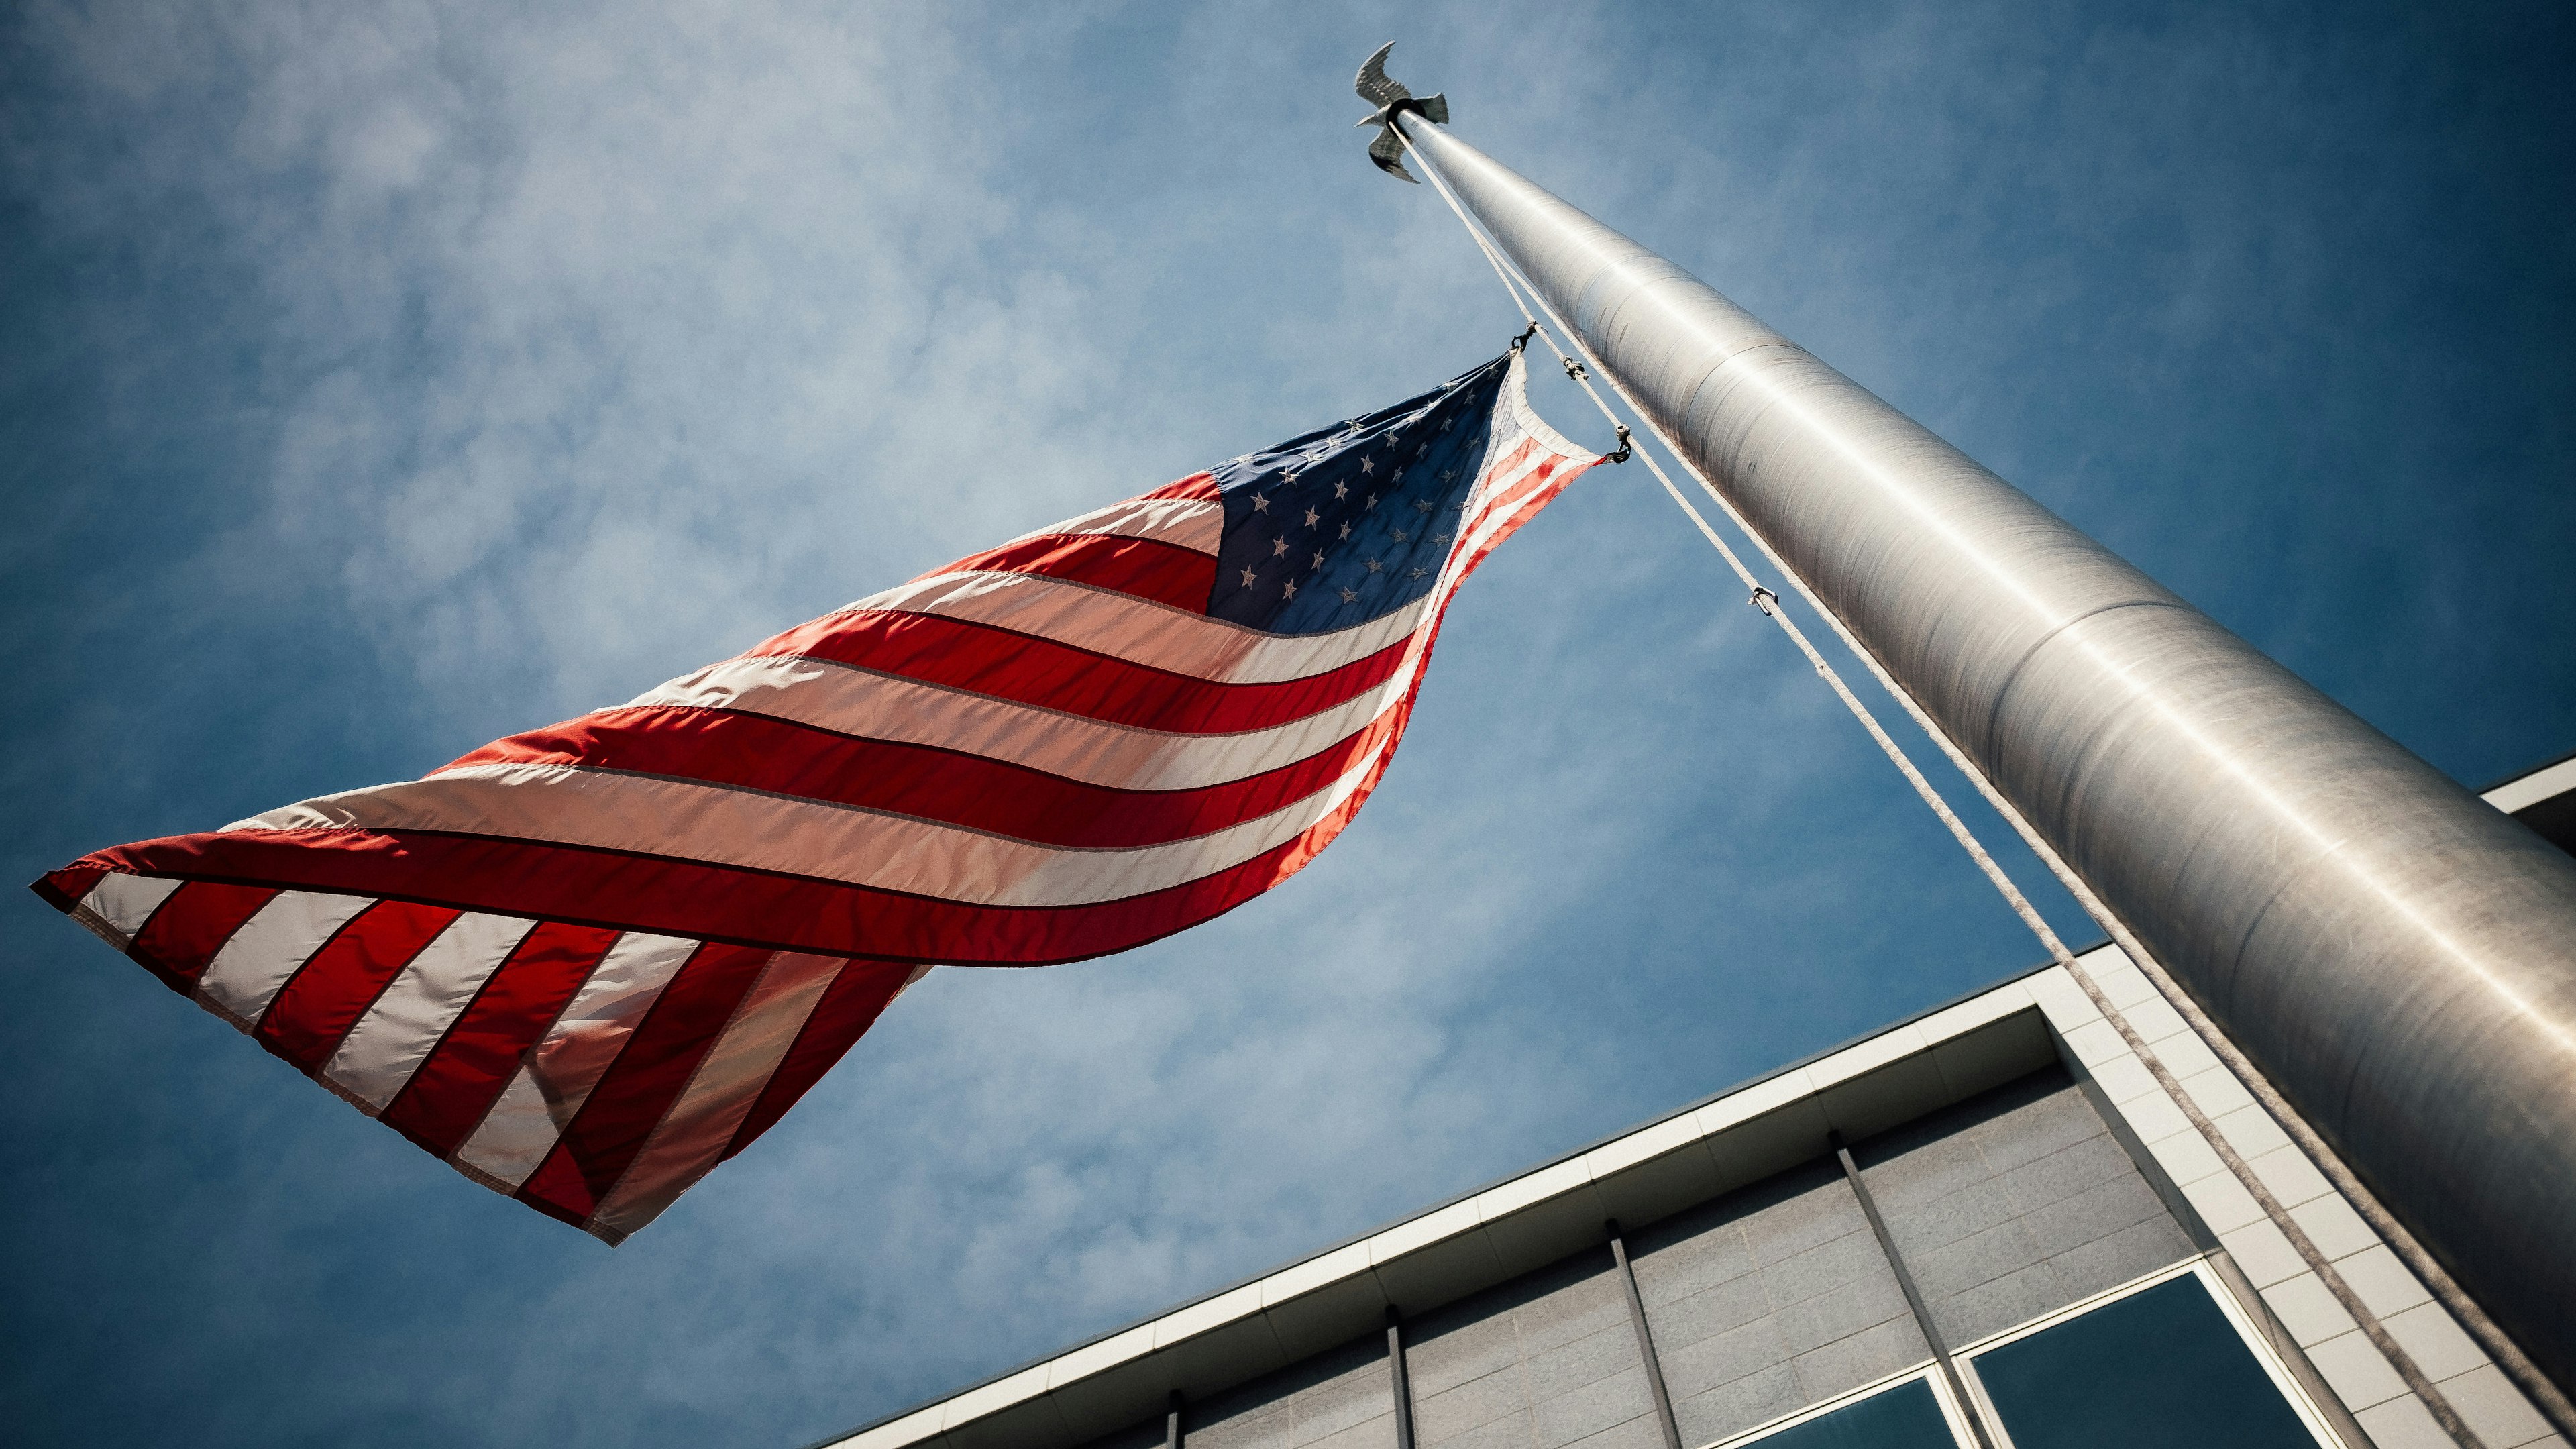 Photo of an American flag waving on a pole with a blue, cloudy sky in the background. Picture is taking looking upward at the flag.